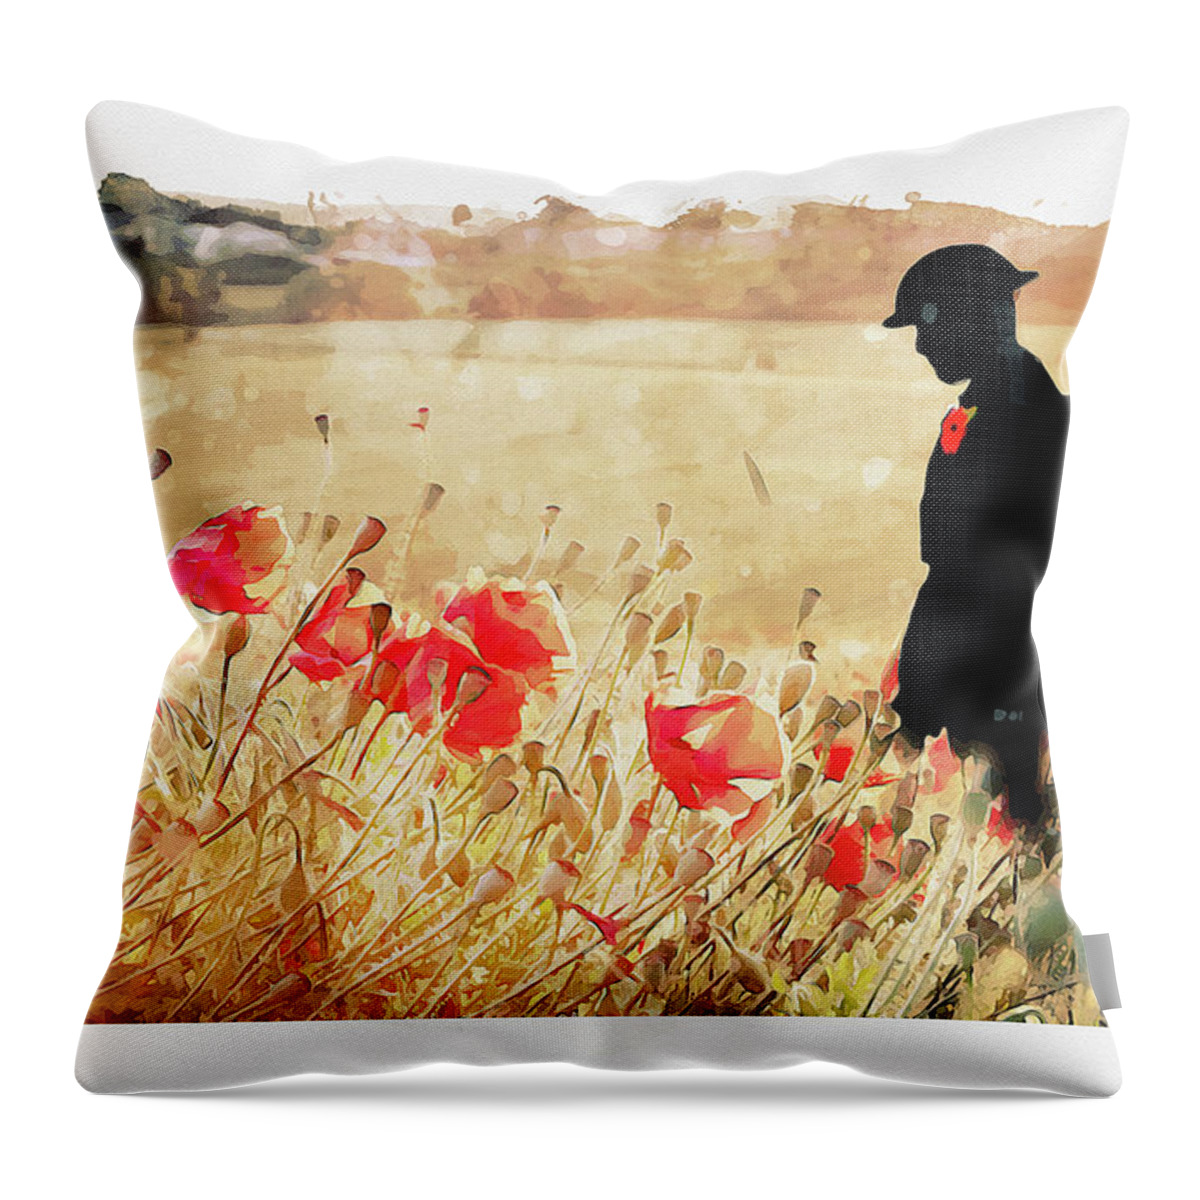 Soldier Poppies Throw Pillow featuring the digital art Remember Them by Airpower Art